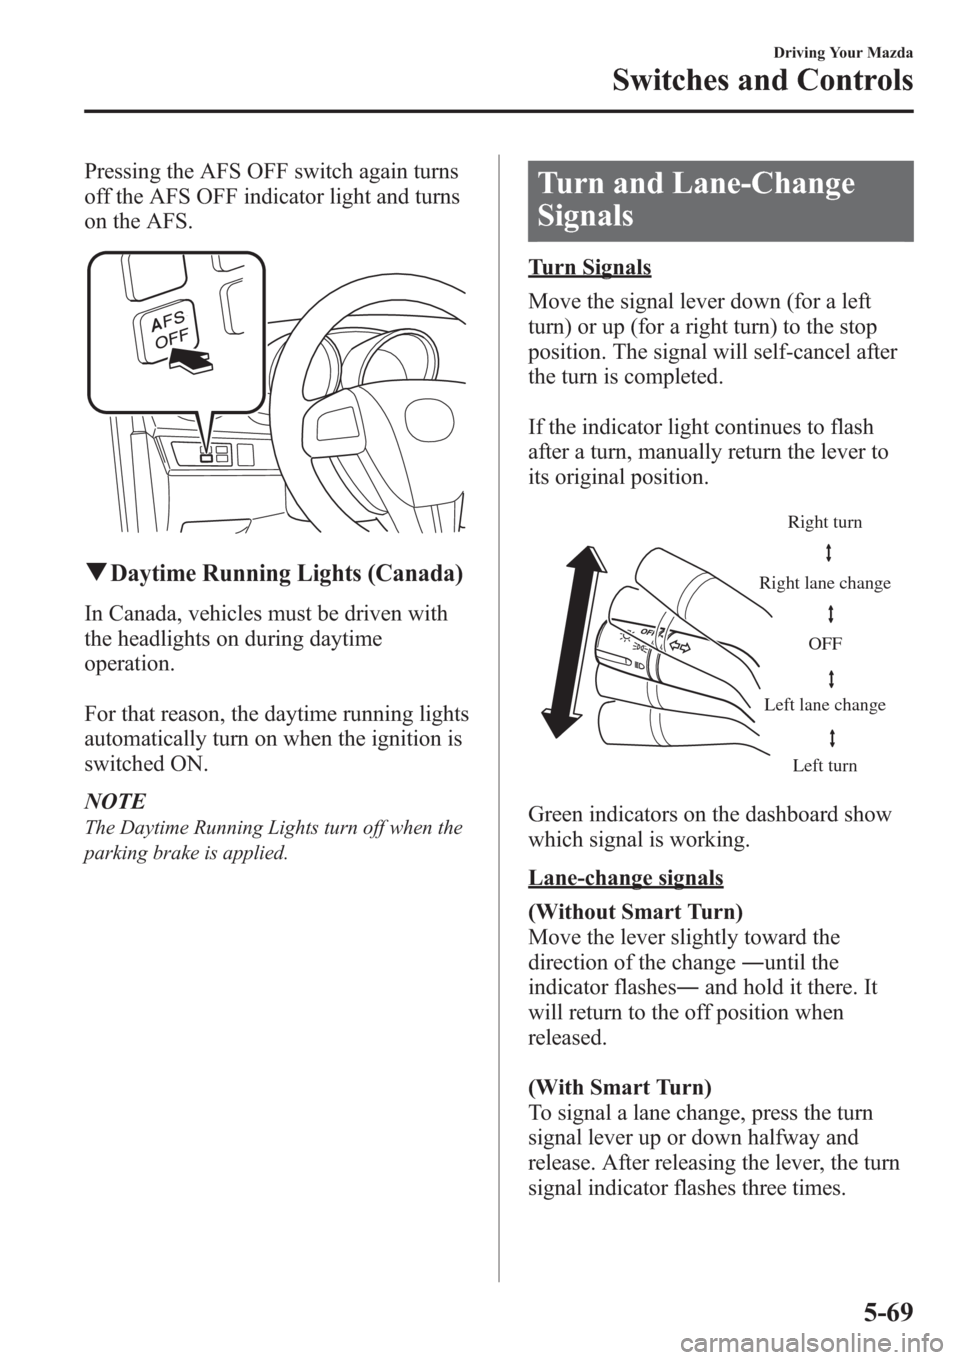 MAZDA MODEL 3 HATCHBACK 2013  Owners Manual (in English) Pressing the AFS OFF switch again turns
off the AFS OFF indicator light and turns
on the AFS.
qDaytime Running Lights (Canada)
In Canada, vehicles must be driven with
the headlights on during daytime
